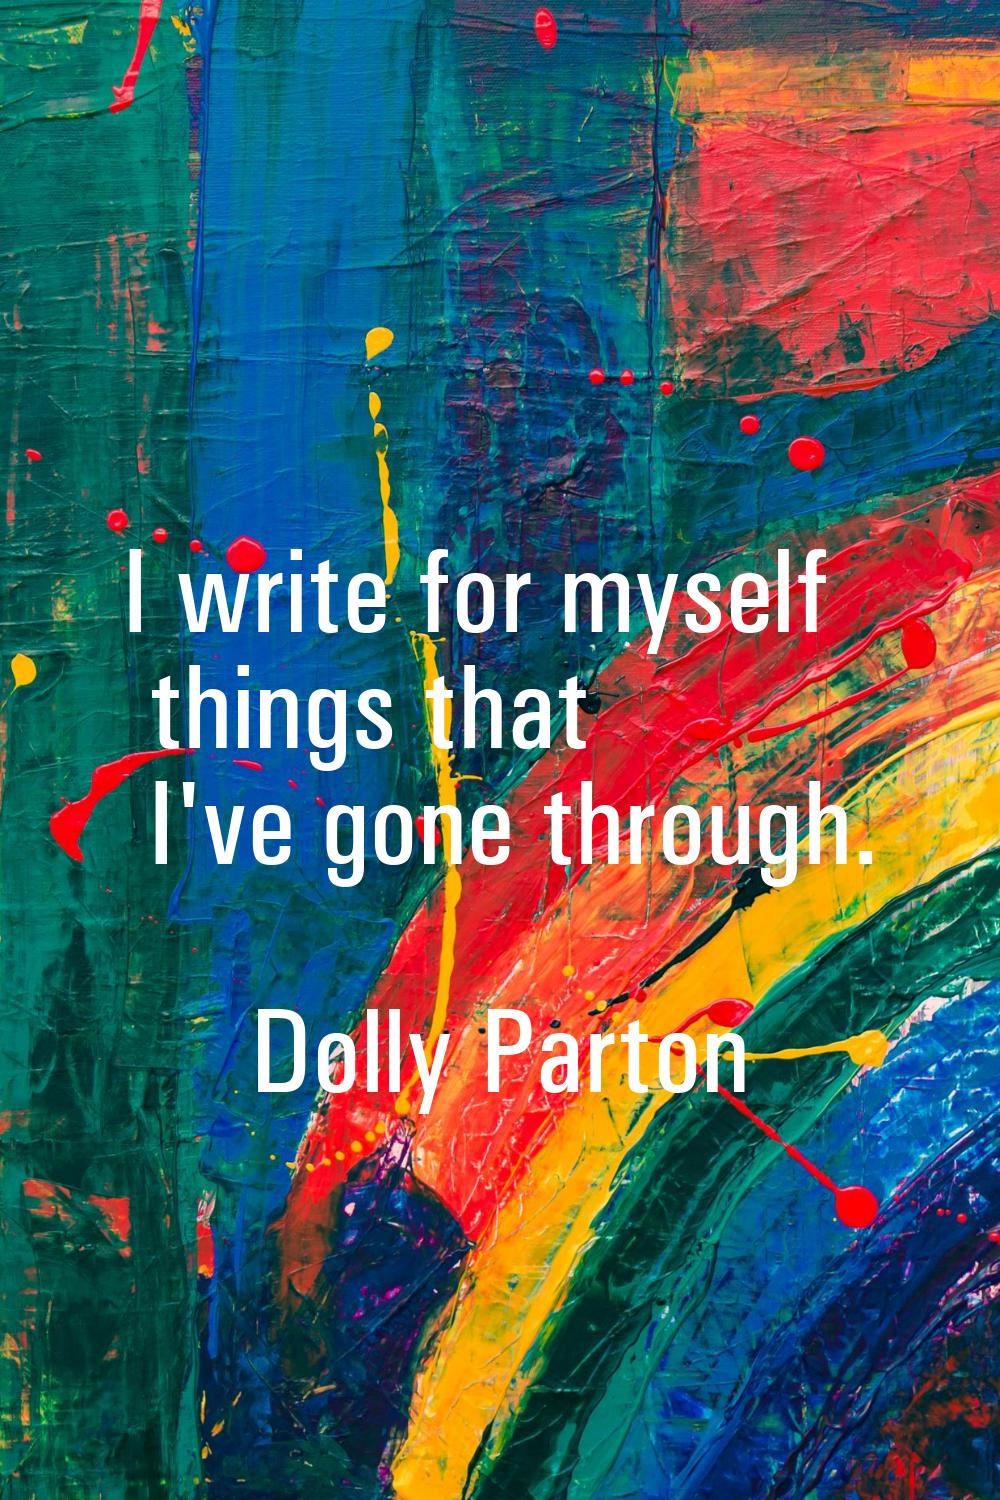 I write for myself things that I've gone through.